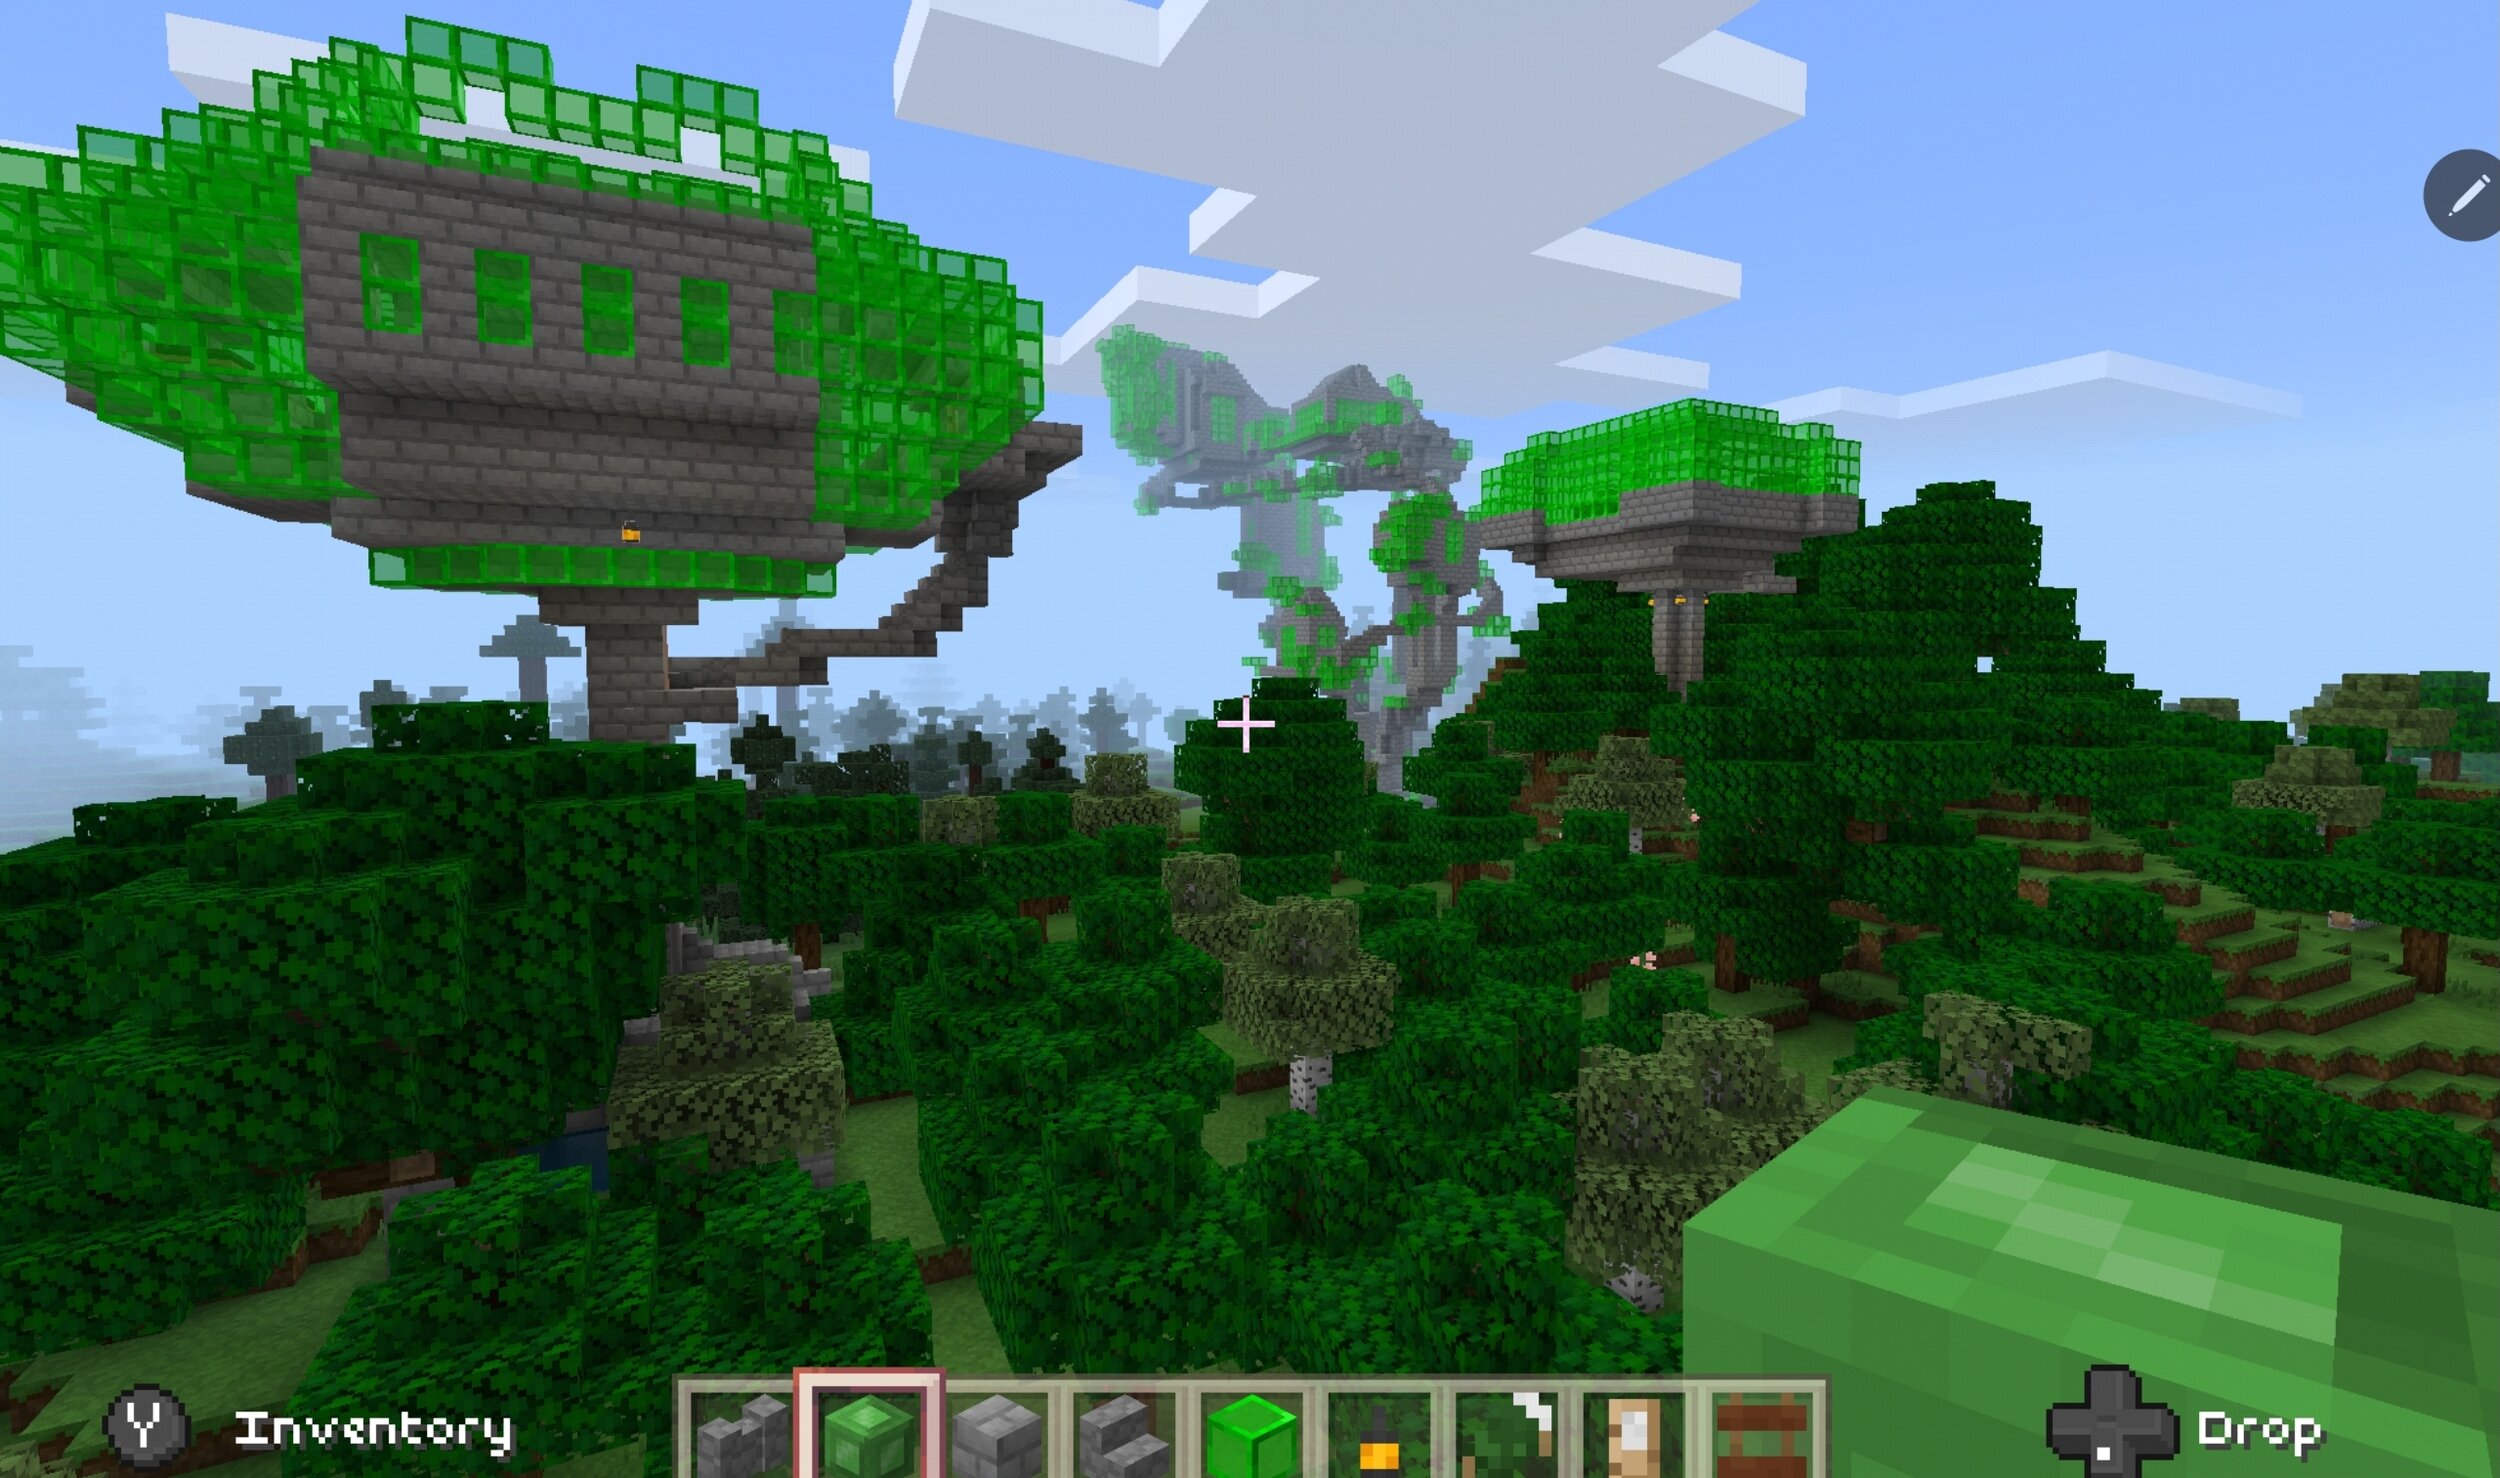 The first four tree castles are all fairly close together